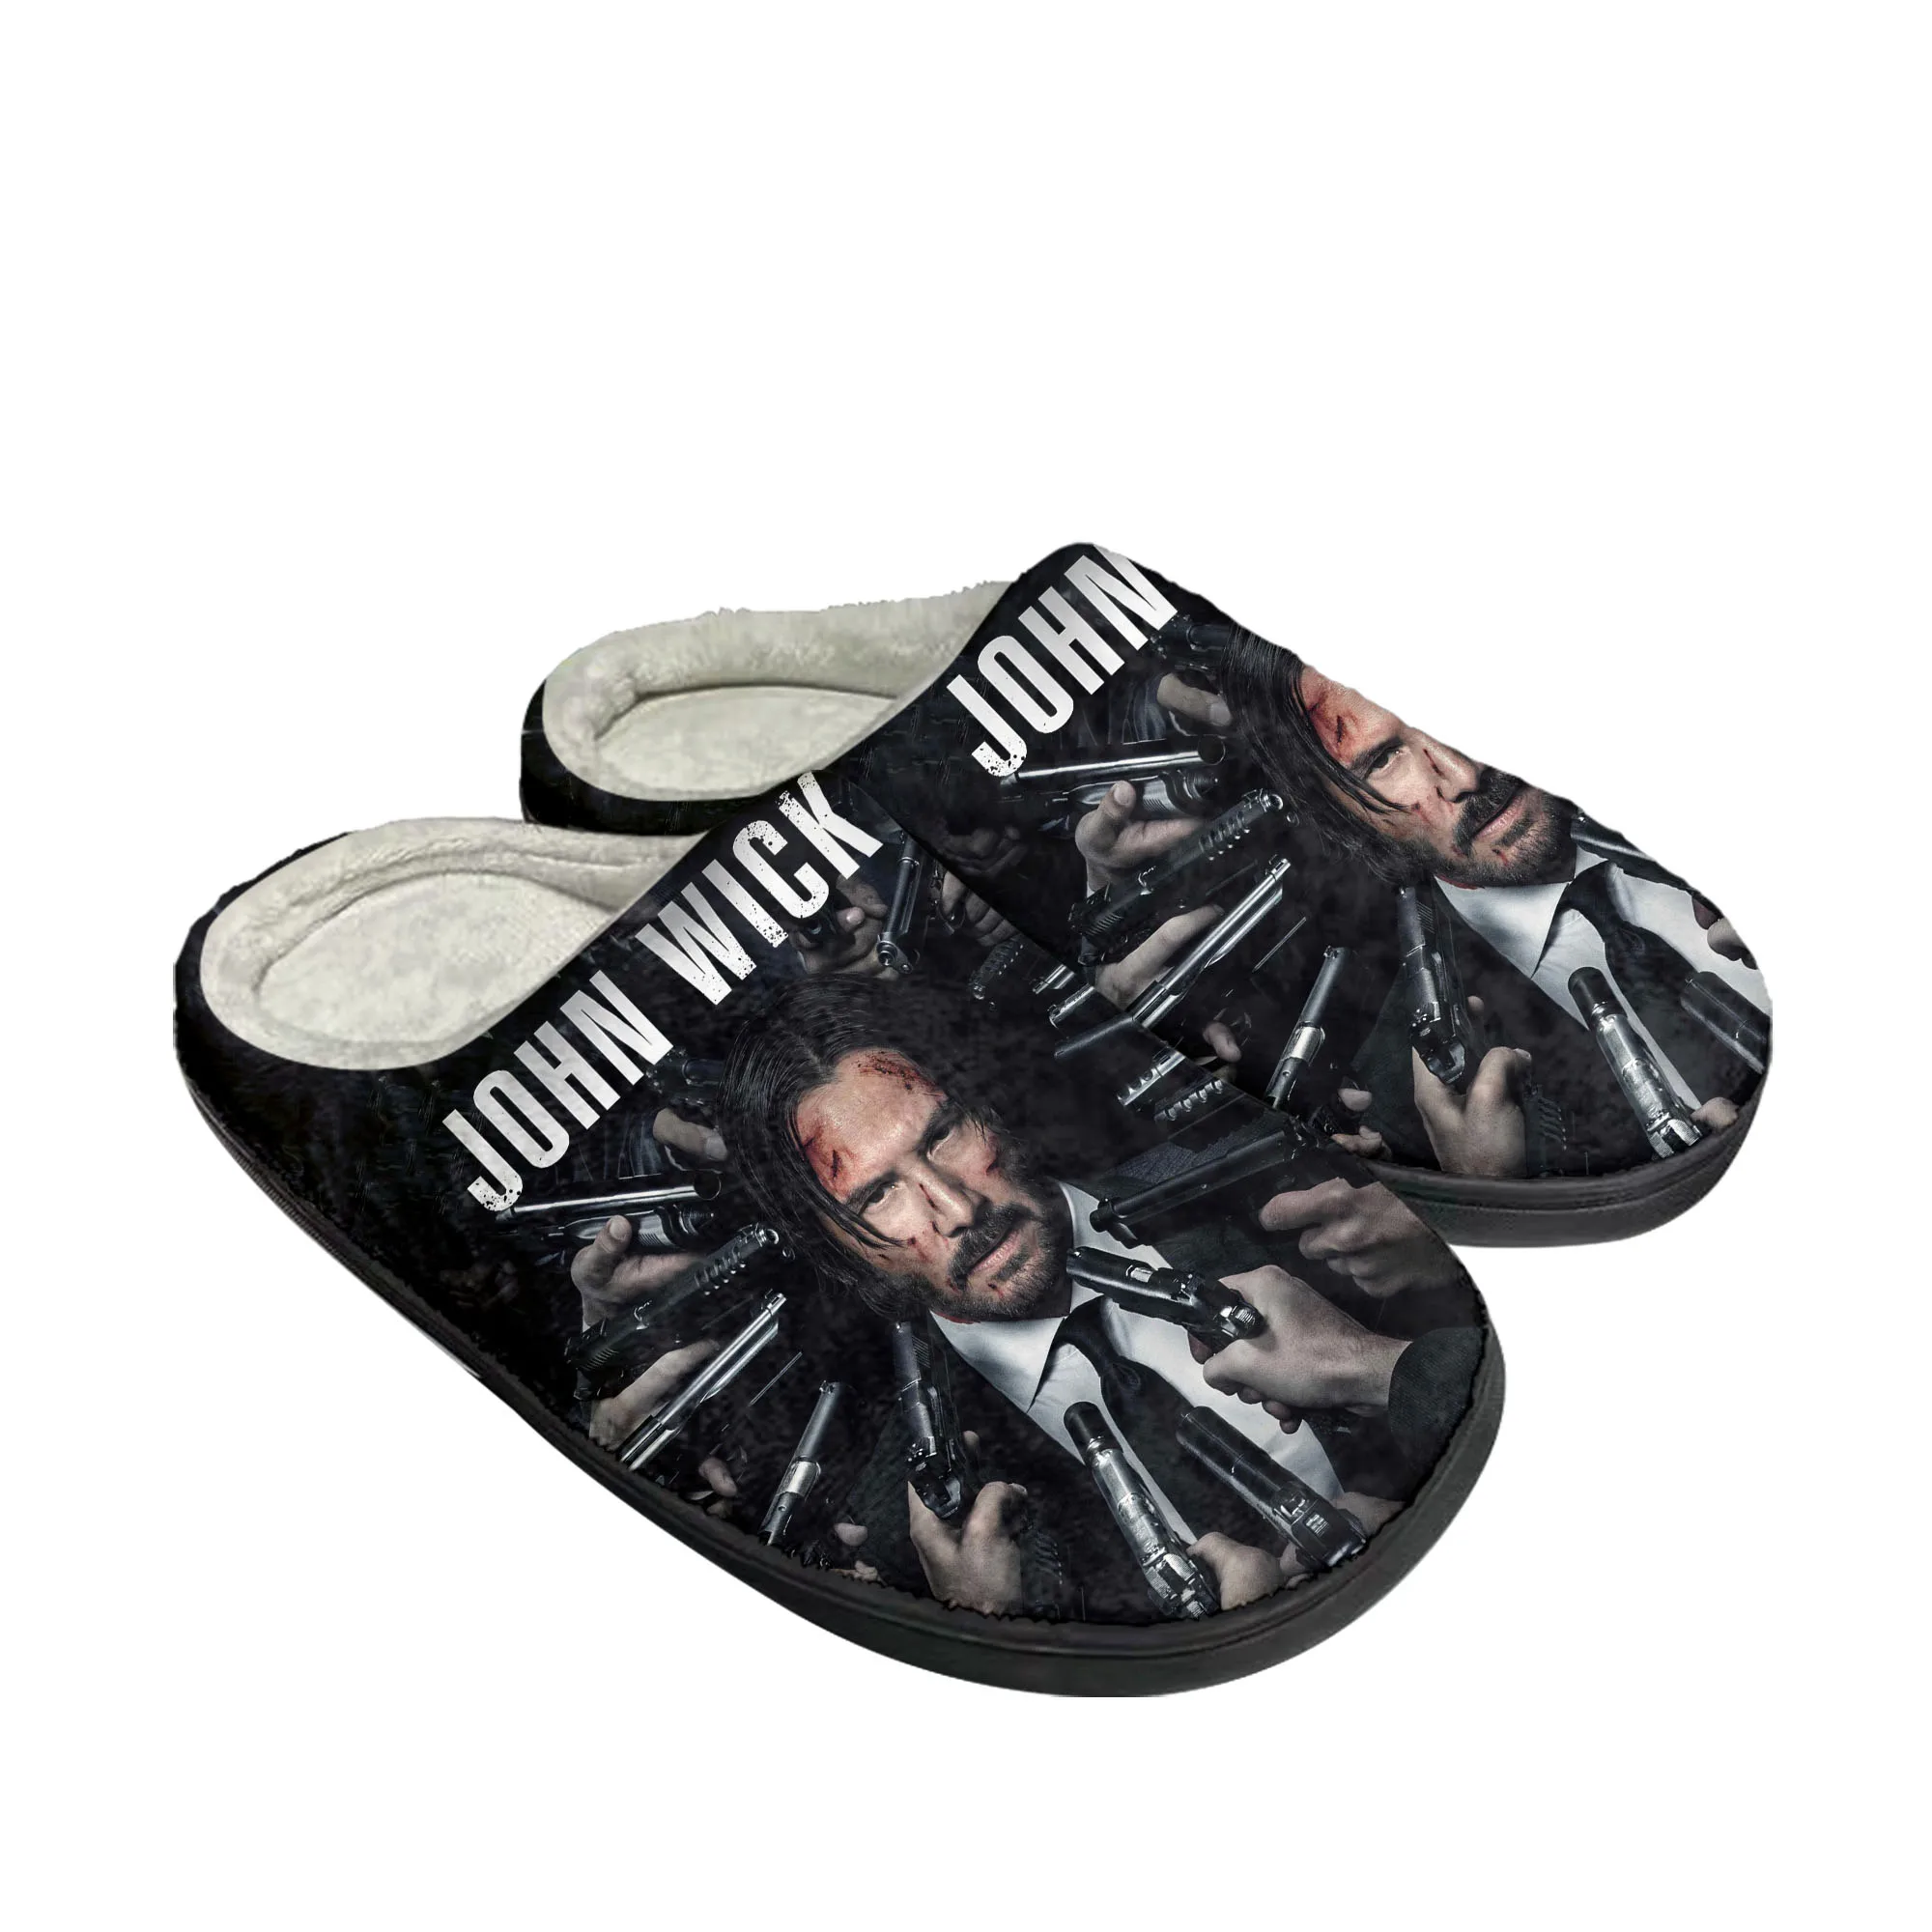 

John Wick Keanu Reeves Home Cotton Slippers Mens Womens Plush Bedroom Casual Keep Warm Shoes Thermal Slipper Customized DIY Shoe